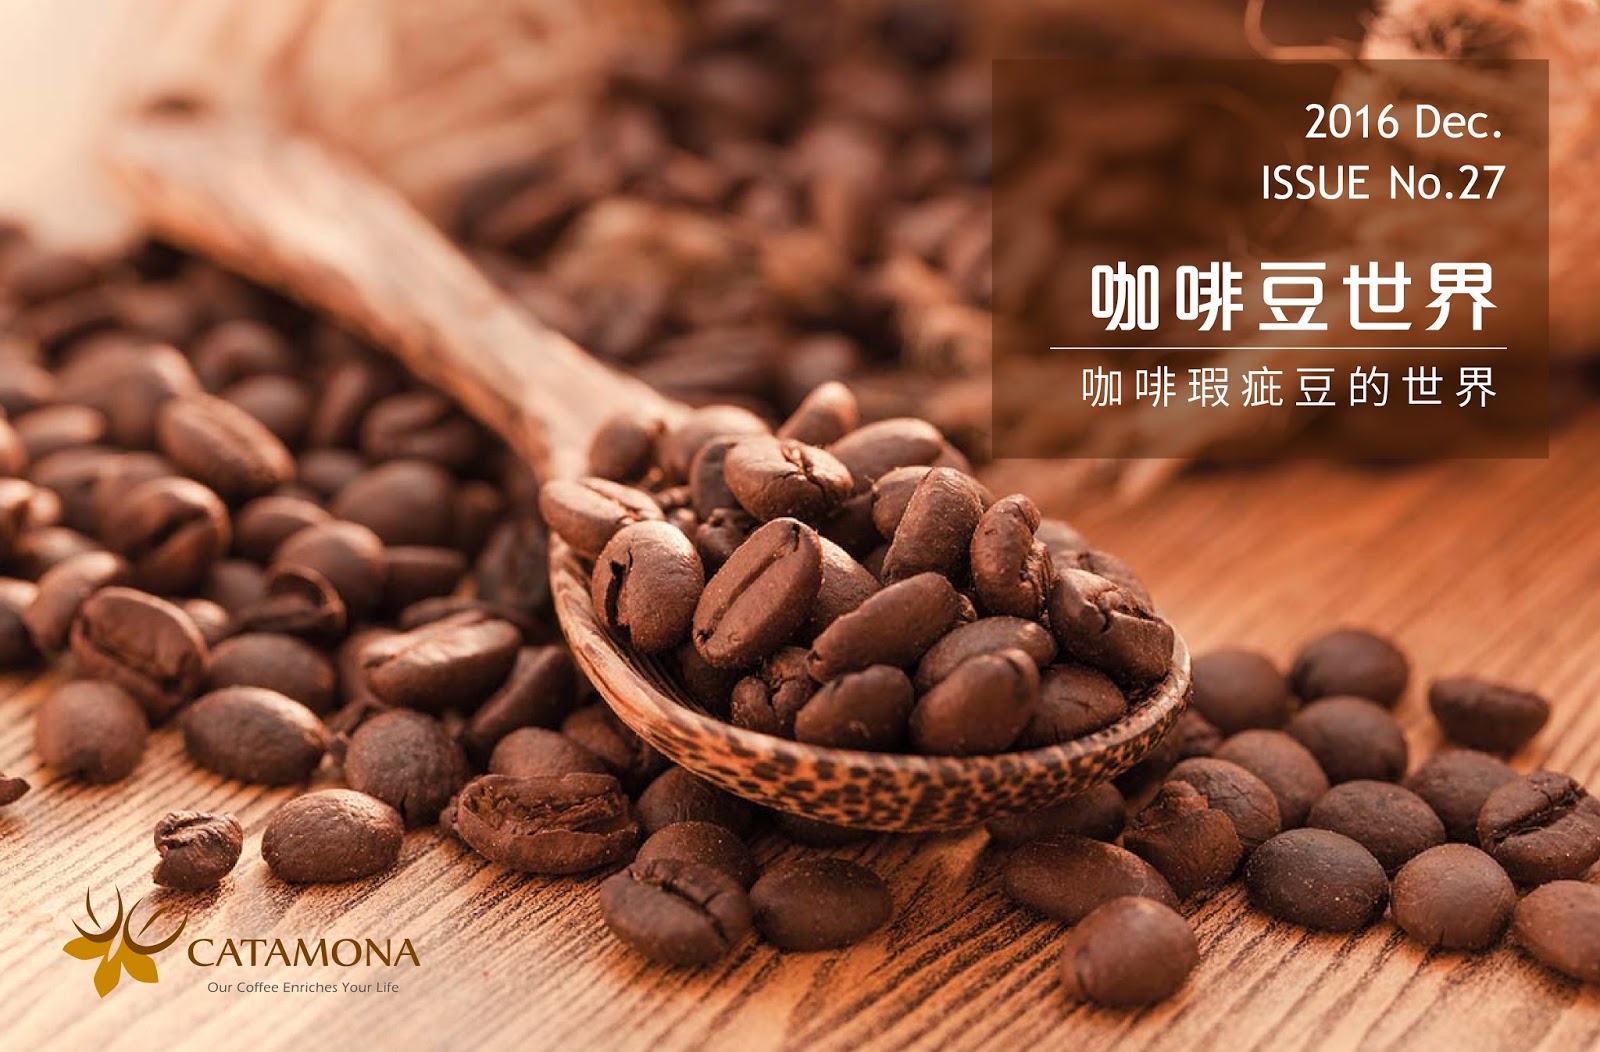 World of Coffee beans | World of defective Coffee beans